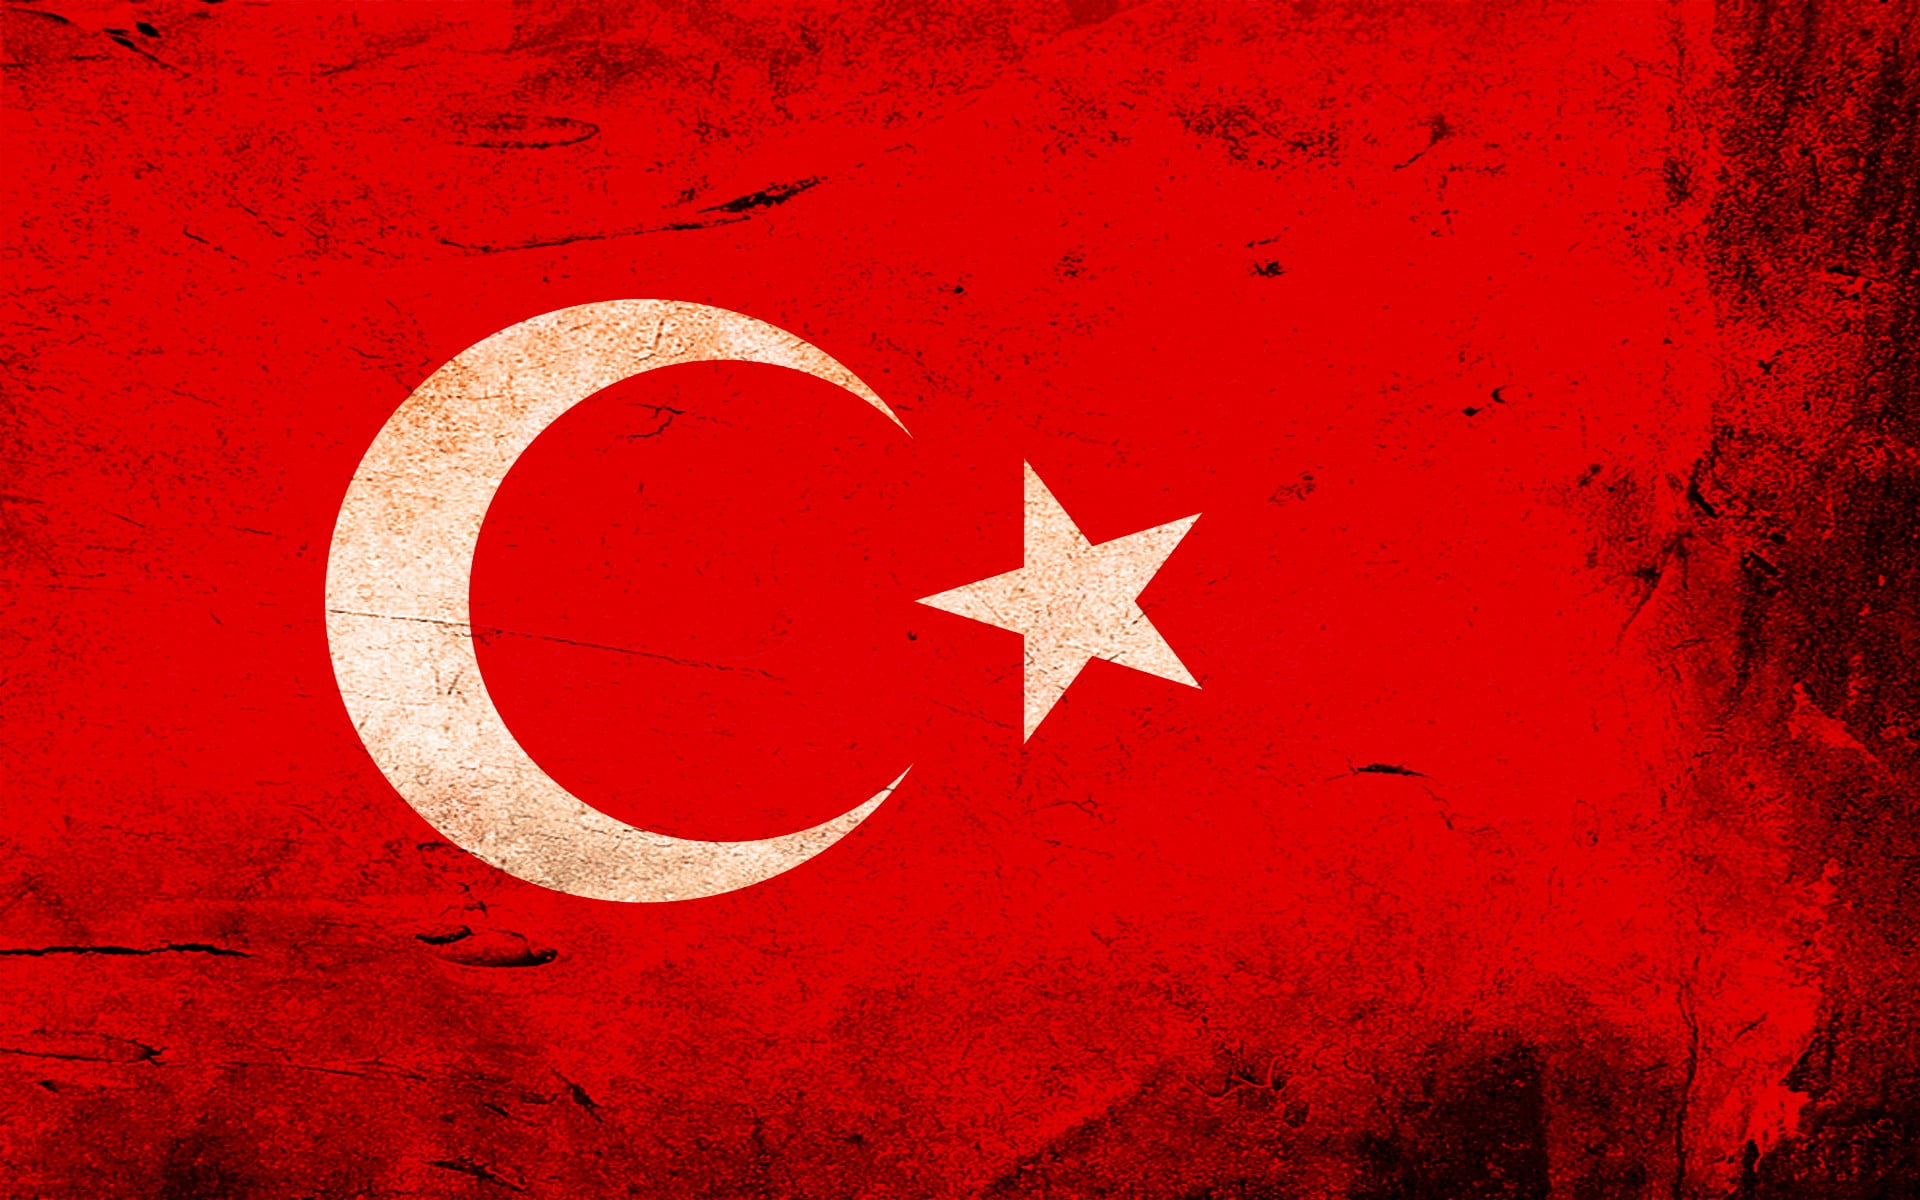 red and white star print textile, Turkey, flag, grunge, no people